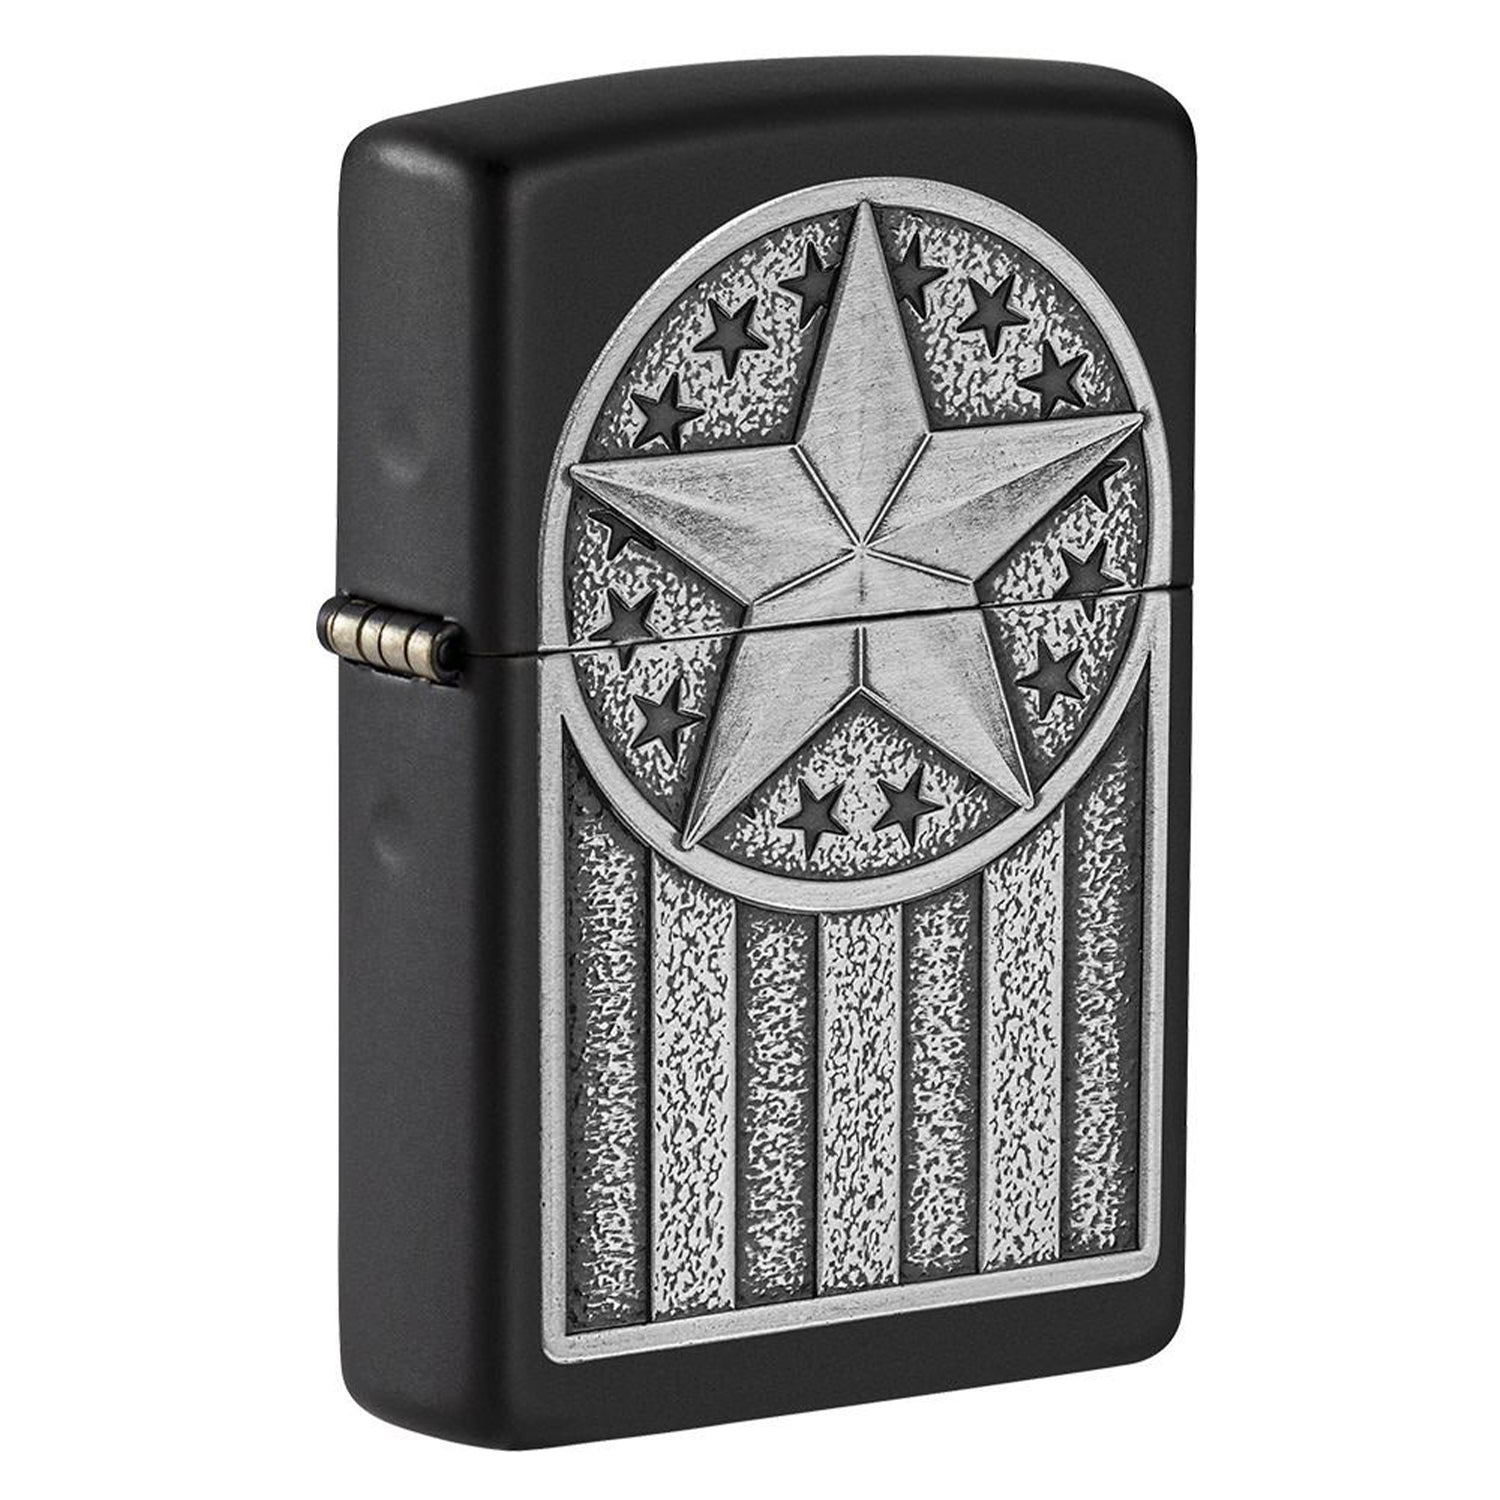 Hong Kong Zippo Lighters - Authentic Military & Street Styles 